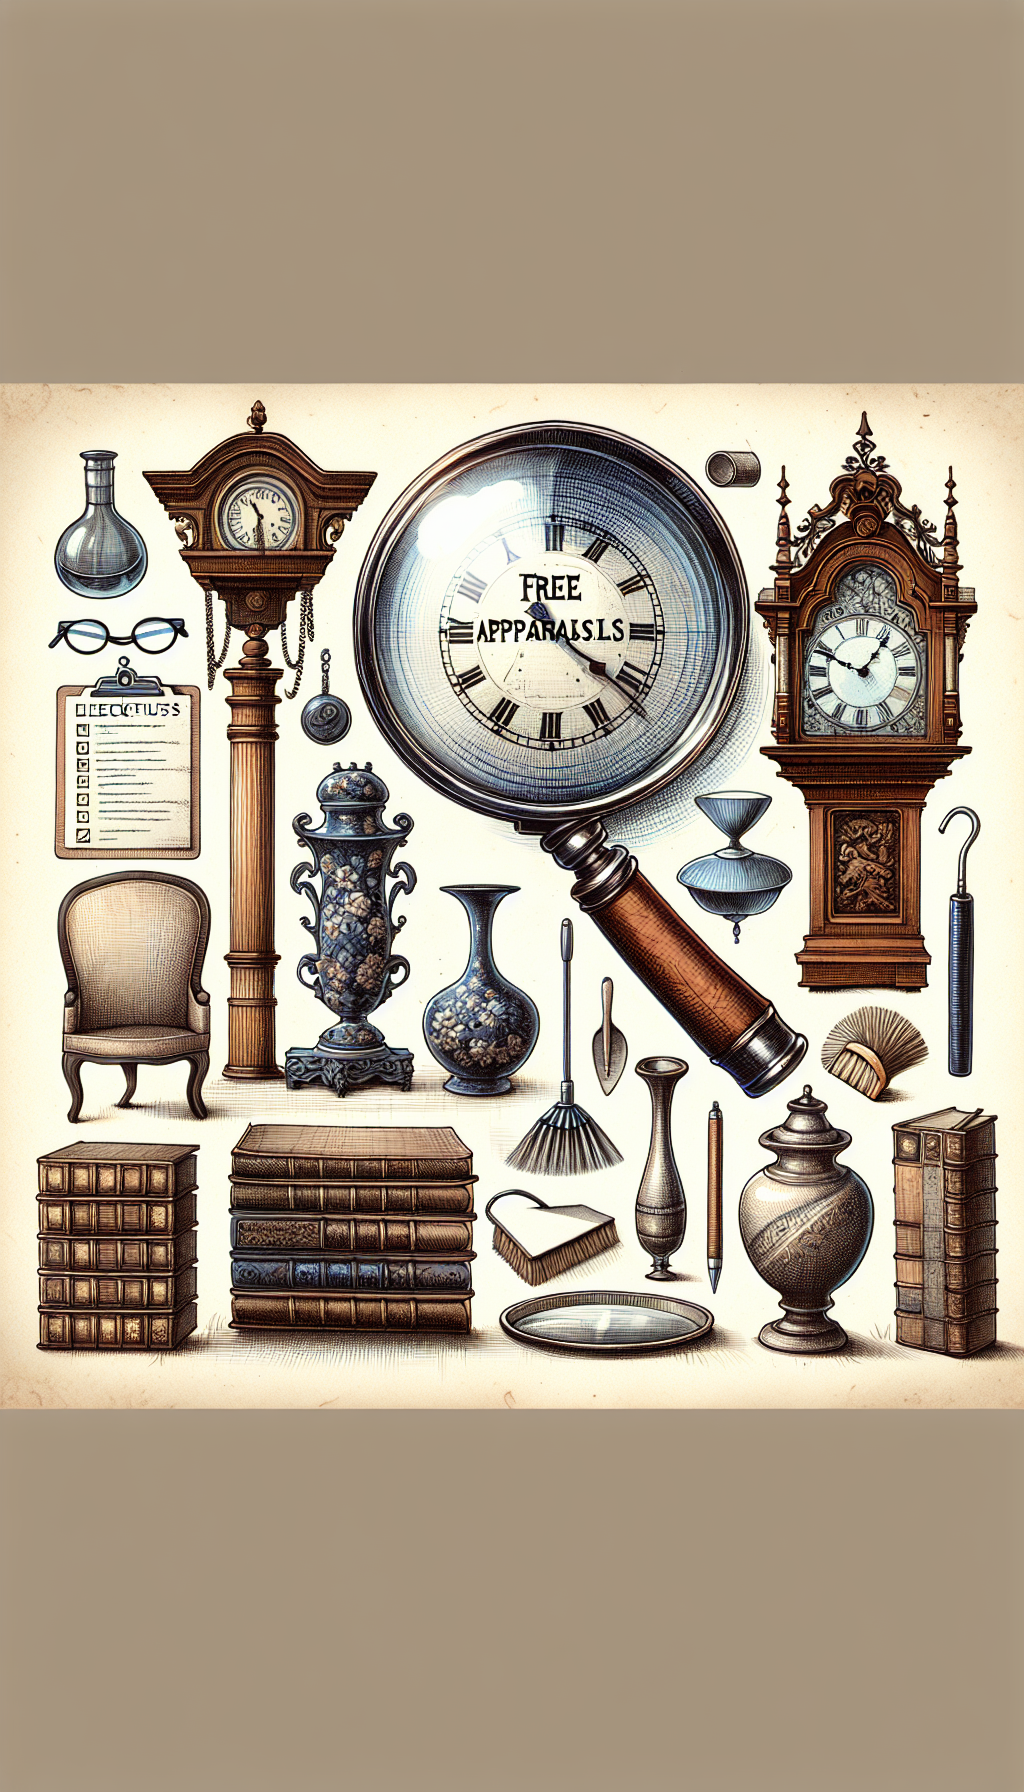 An illustration featuring a whimsical vintage magnifying glass hovering over a collage of antiques, such as a grandfather clock, an ornate vase, and a stack of ancient books. The clock face shows the phrase "Free Appraisals," while subtle checklists and cleaning tools rest in the background, suggesting the antiques are being prepped for examination. Styles range from line art for the tools to watercolor for the antiques.